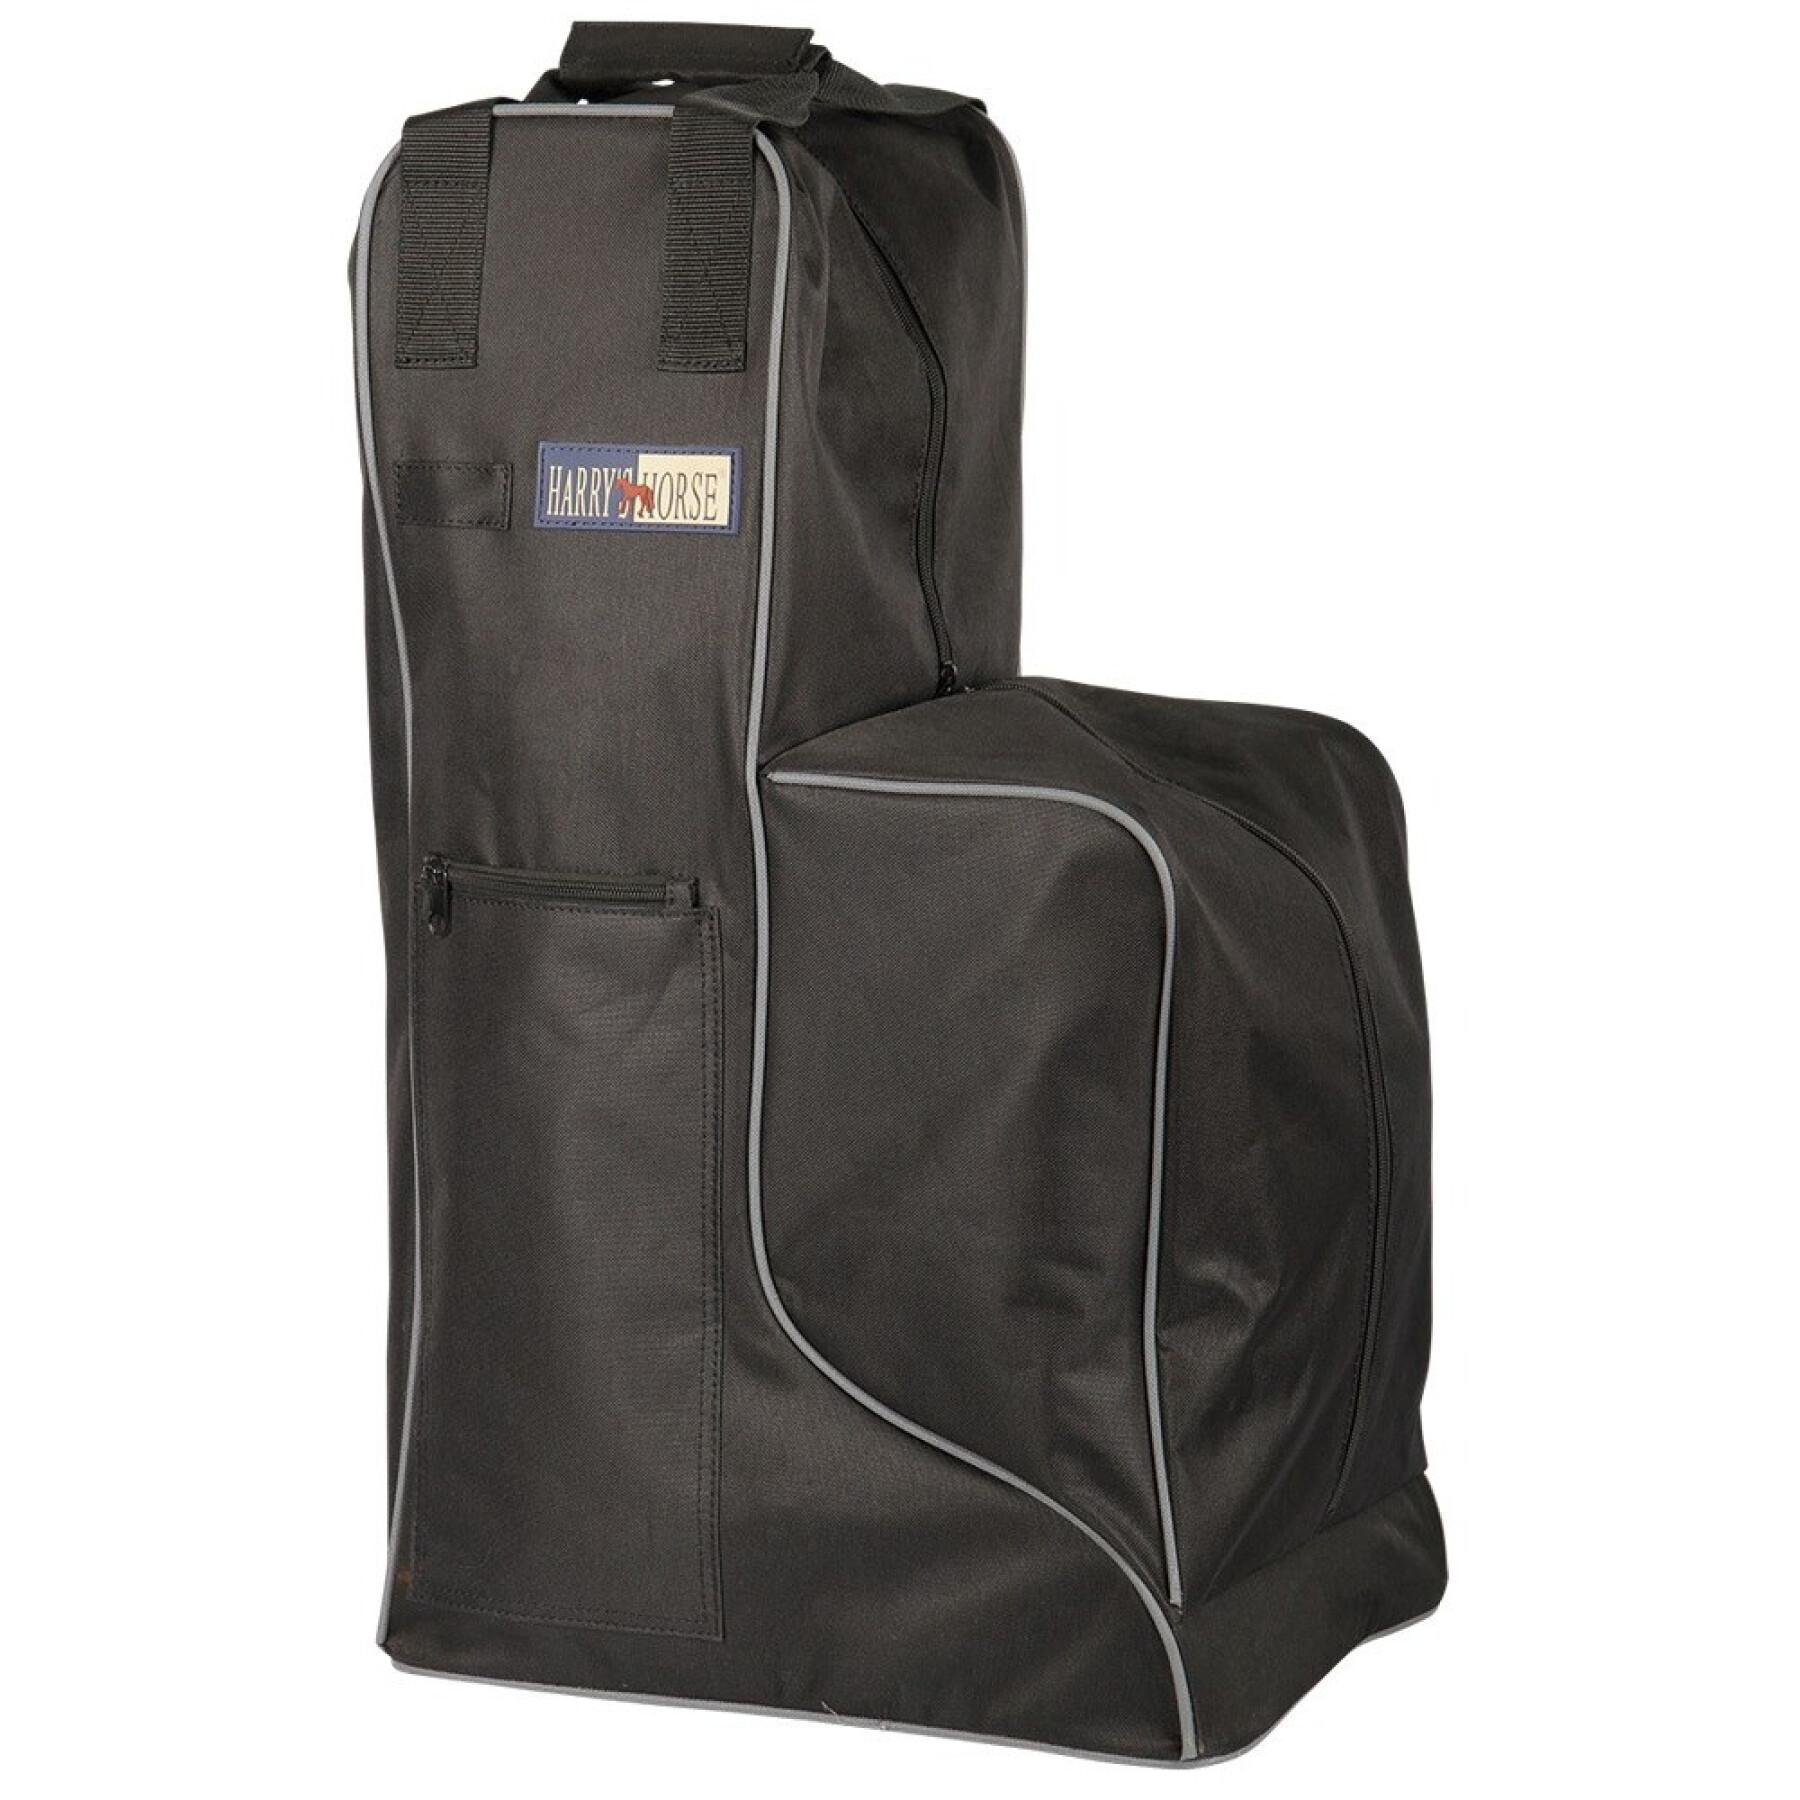 Riding boot bag Harry's Horse Extra